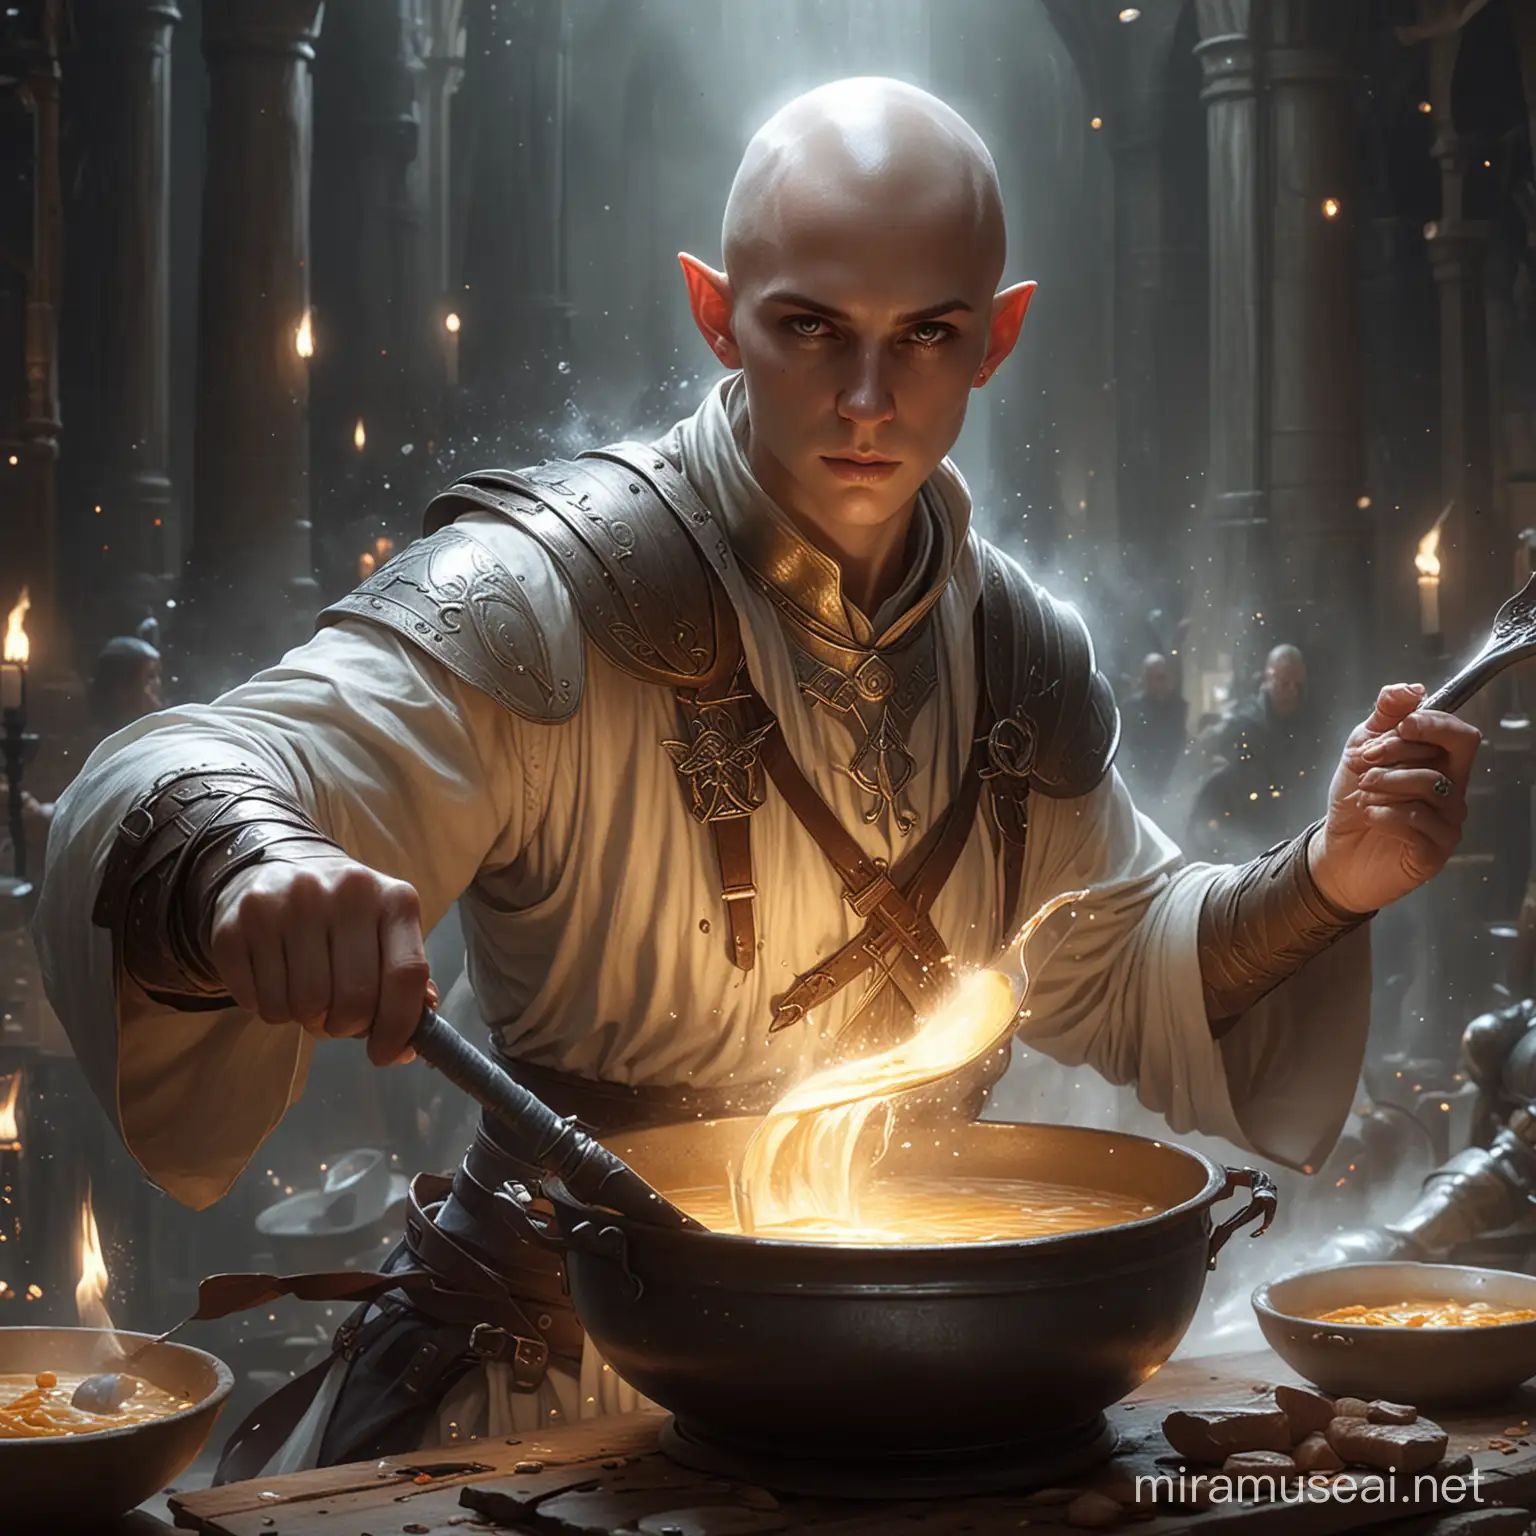 Bald non-binary half-elf cleric, fighting in battle with a long soup ladle, hands illuminated with magic